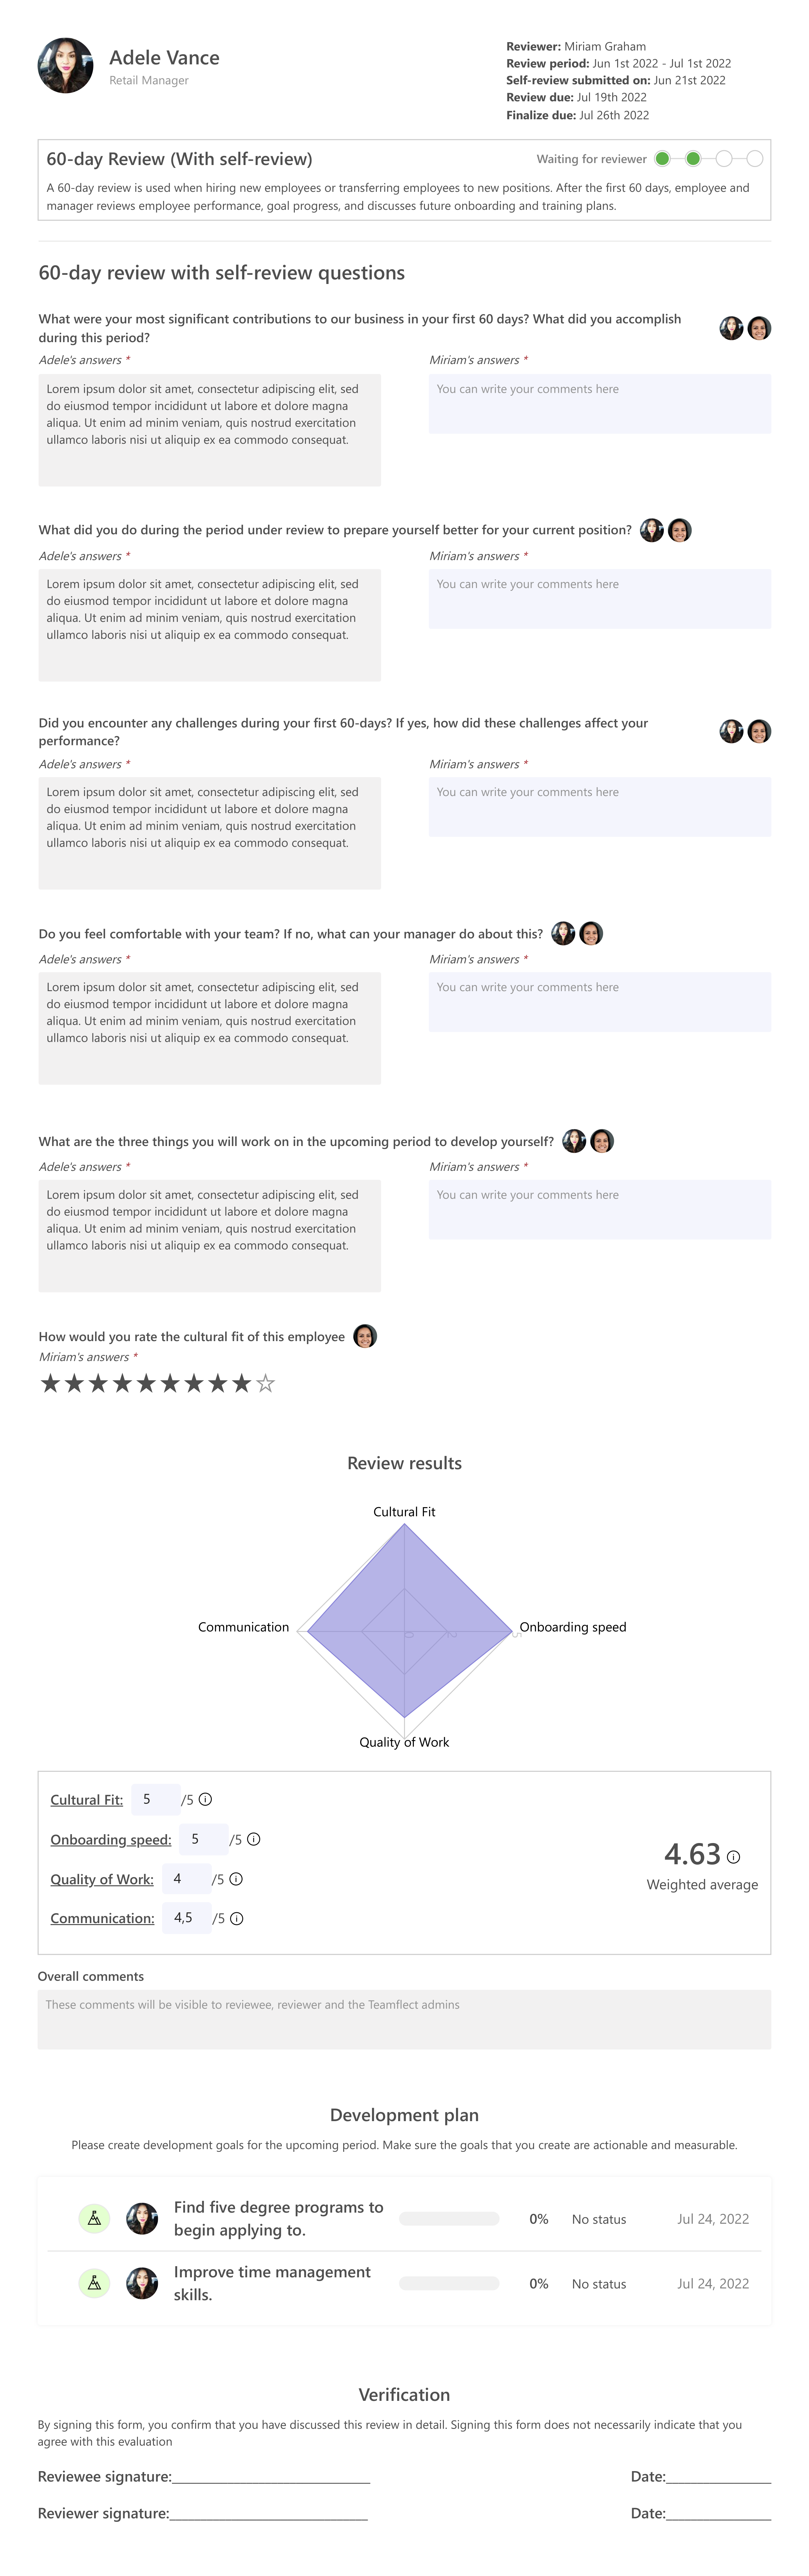 Teamflect 60-day review with self review template in Microsoft Teams